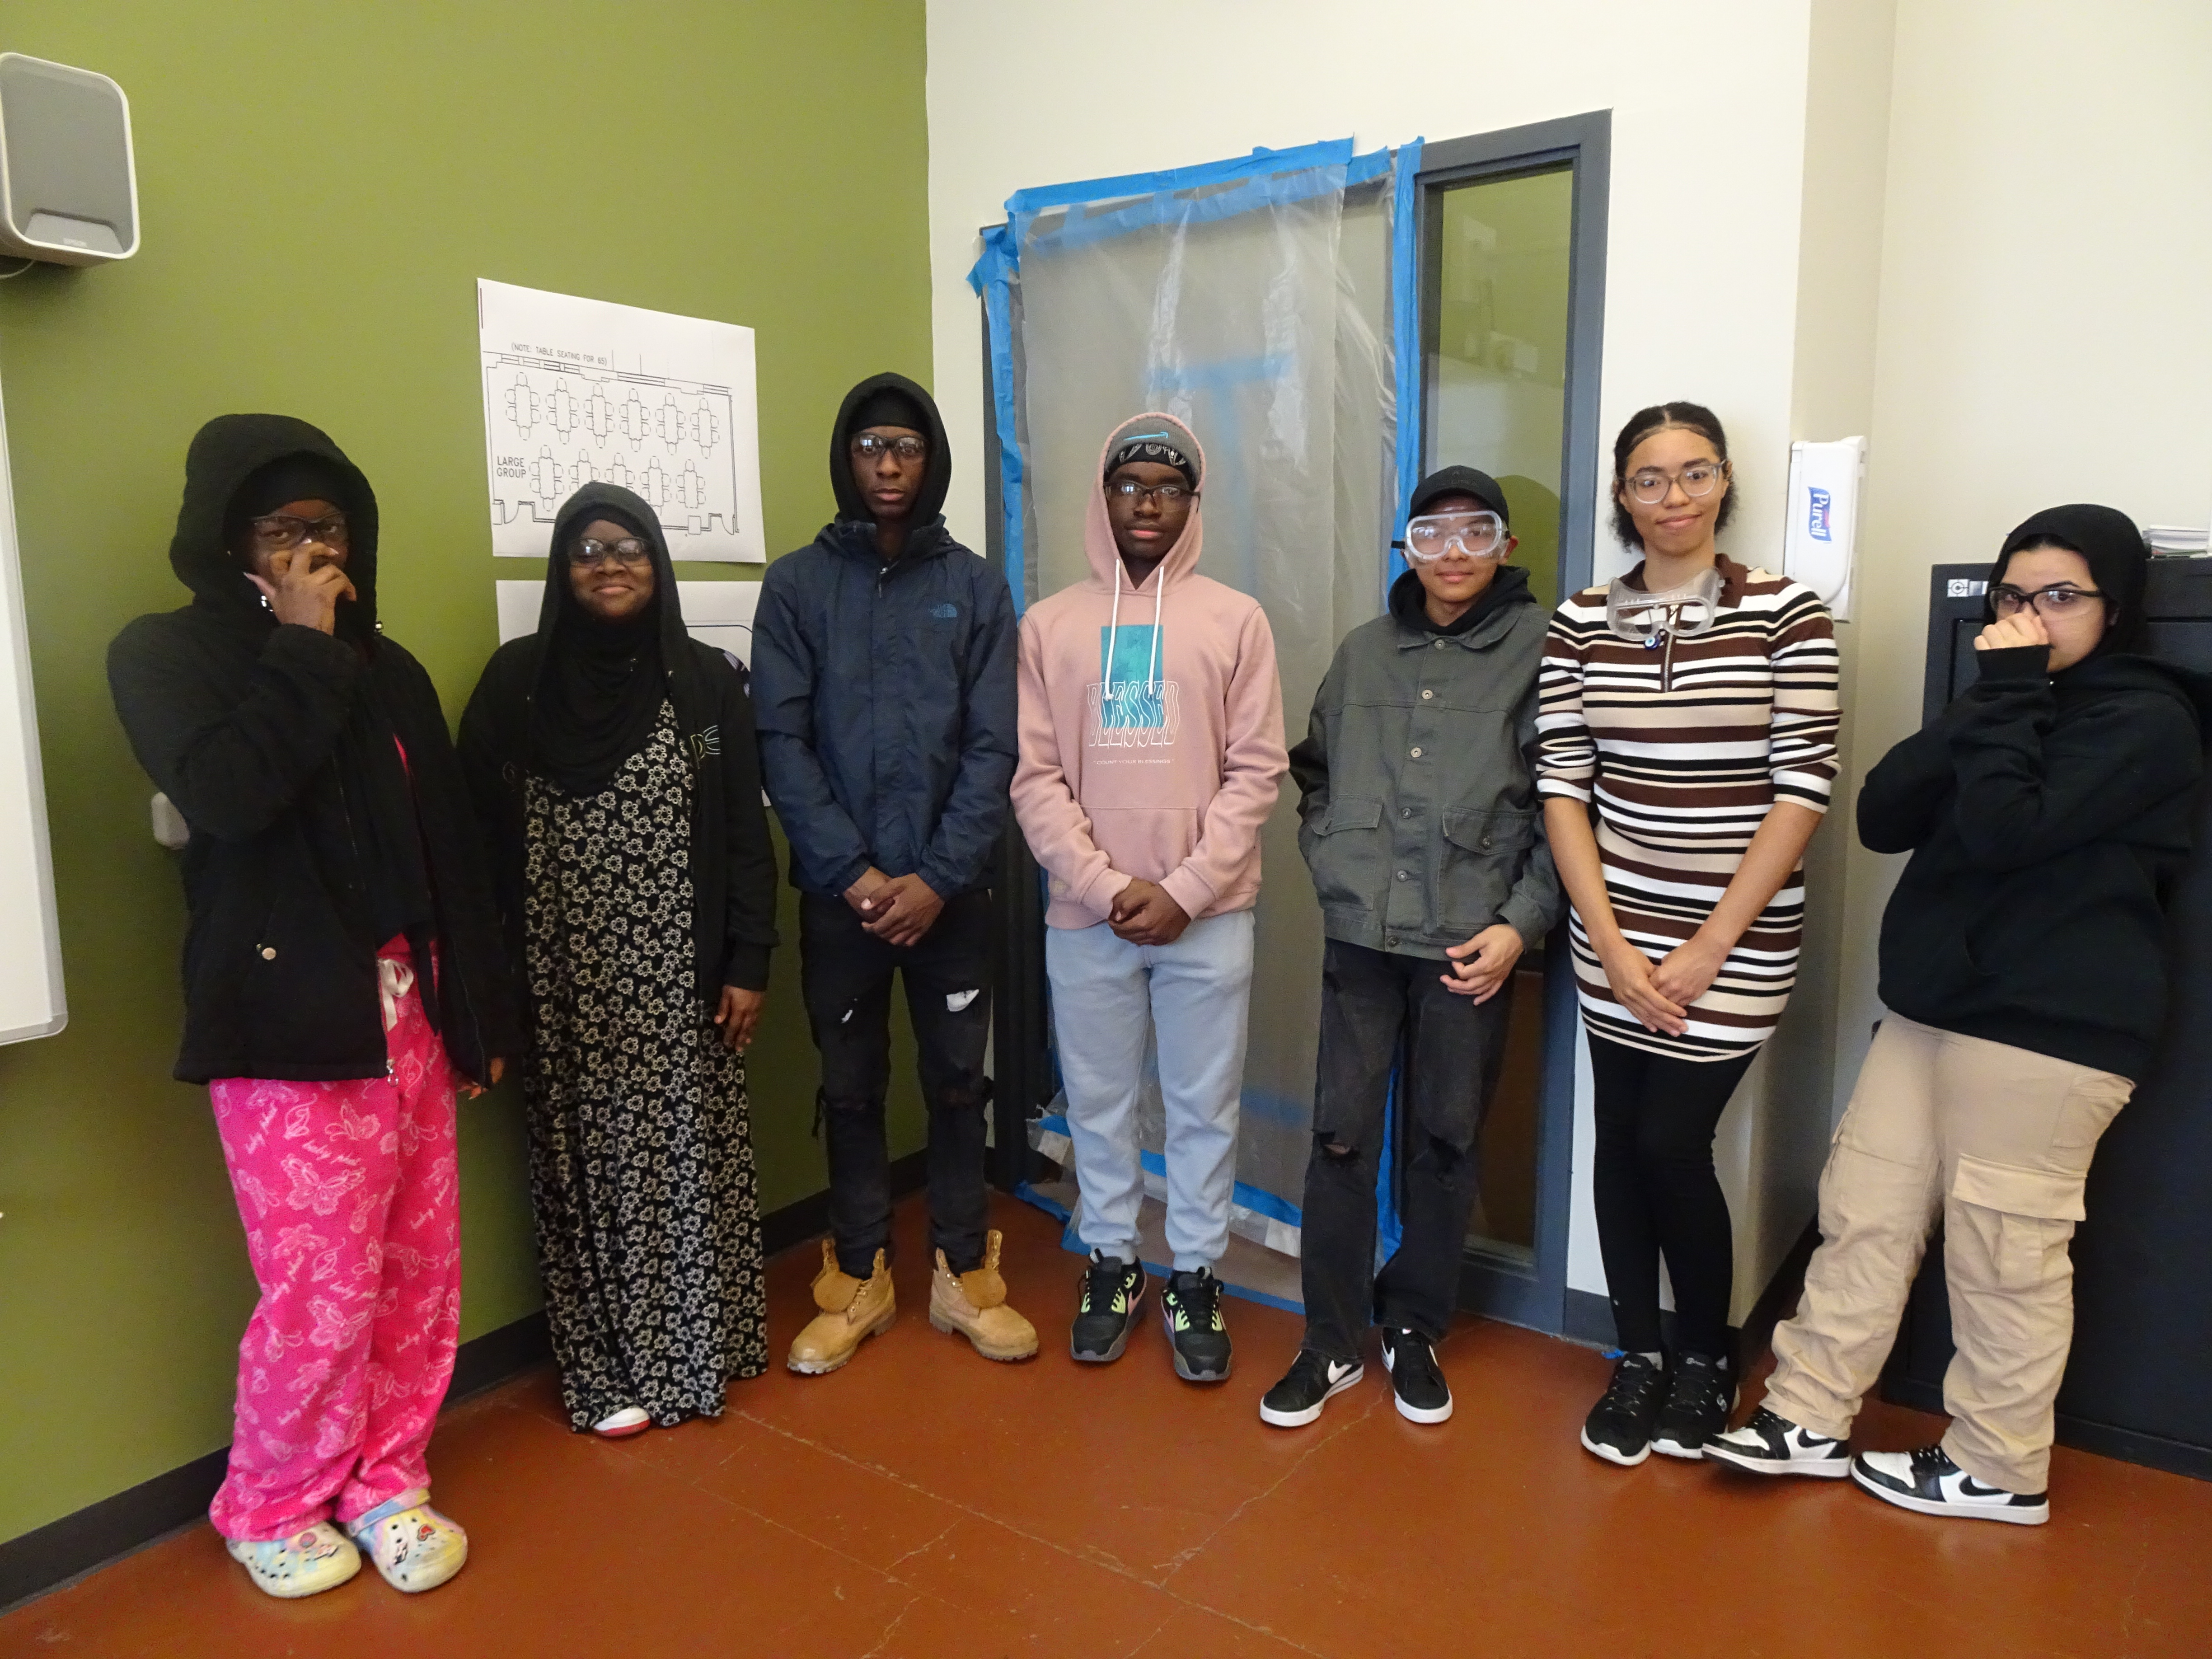 This is a photo of 7 Nottingham students lined up in front of a door that they had just taped up as part of a Lead Training course.